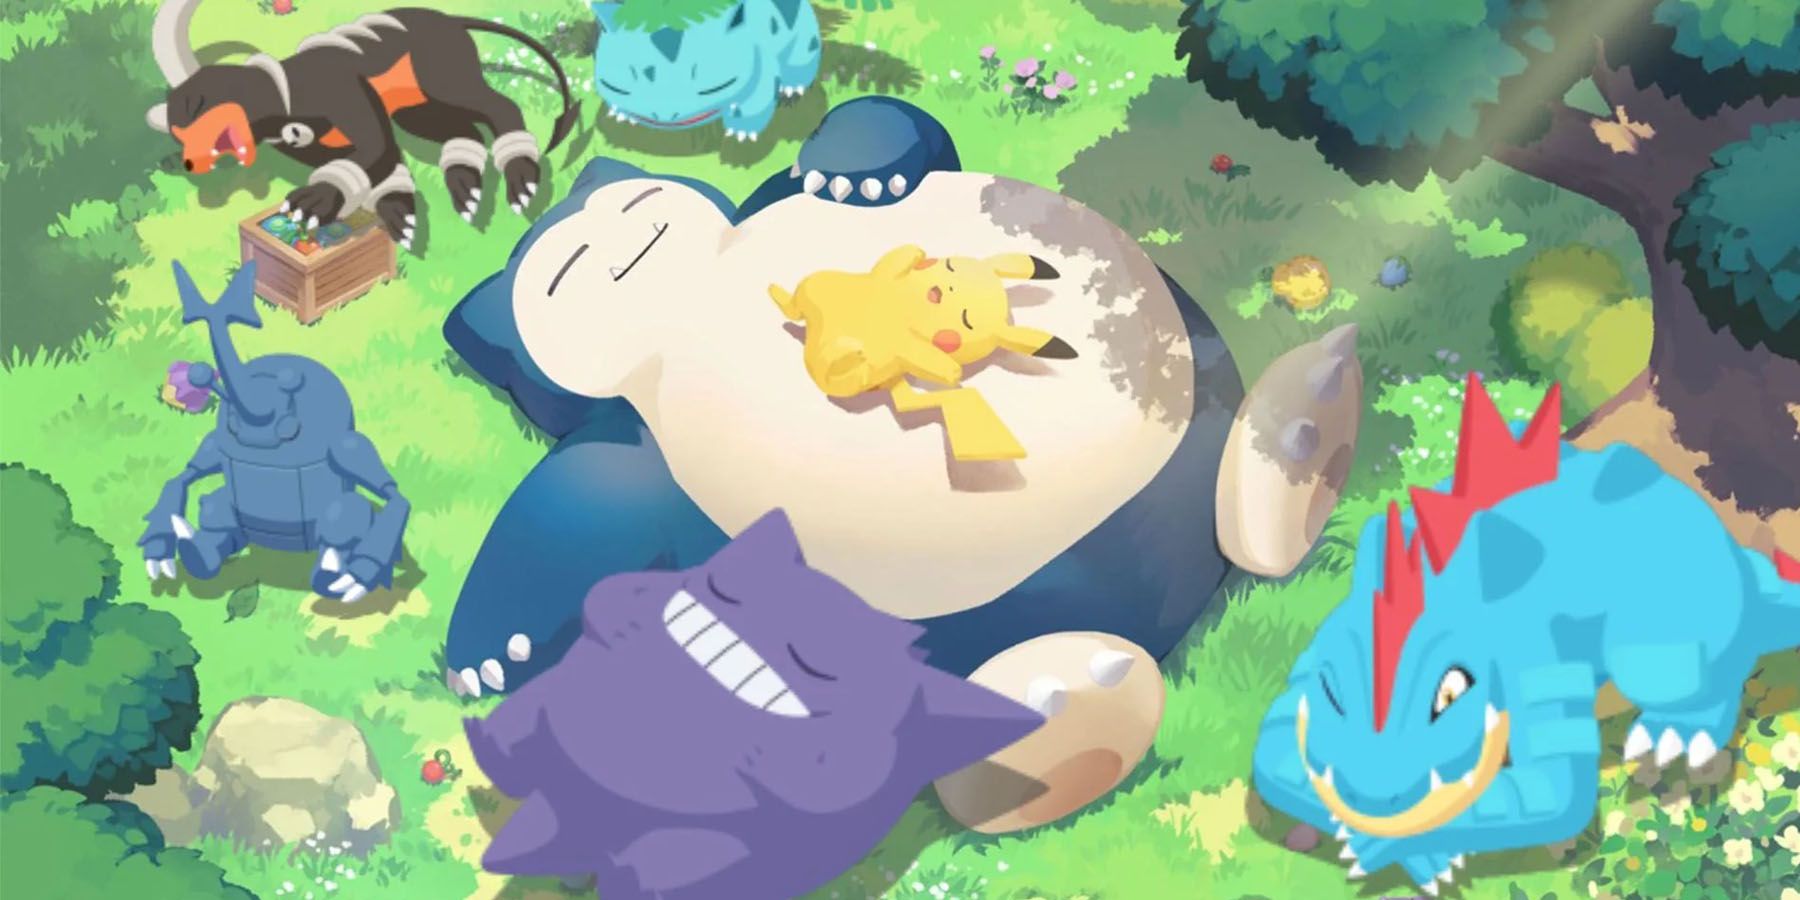 A promotional image of Snorlax, Pikachu, and a group of other Pokemon napping in Pokemon Sleep.